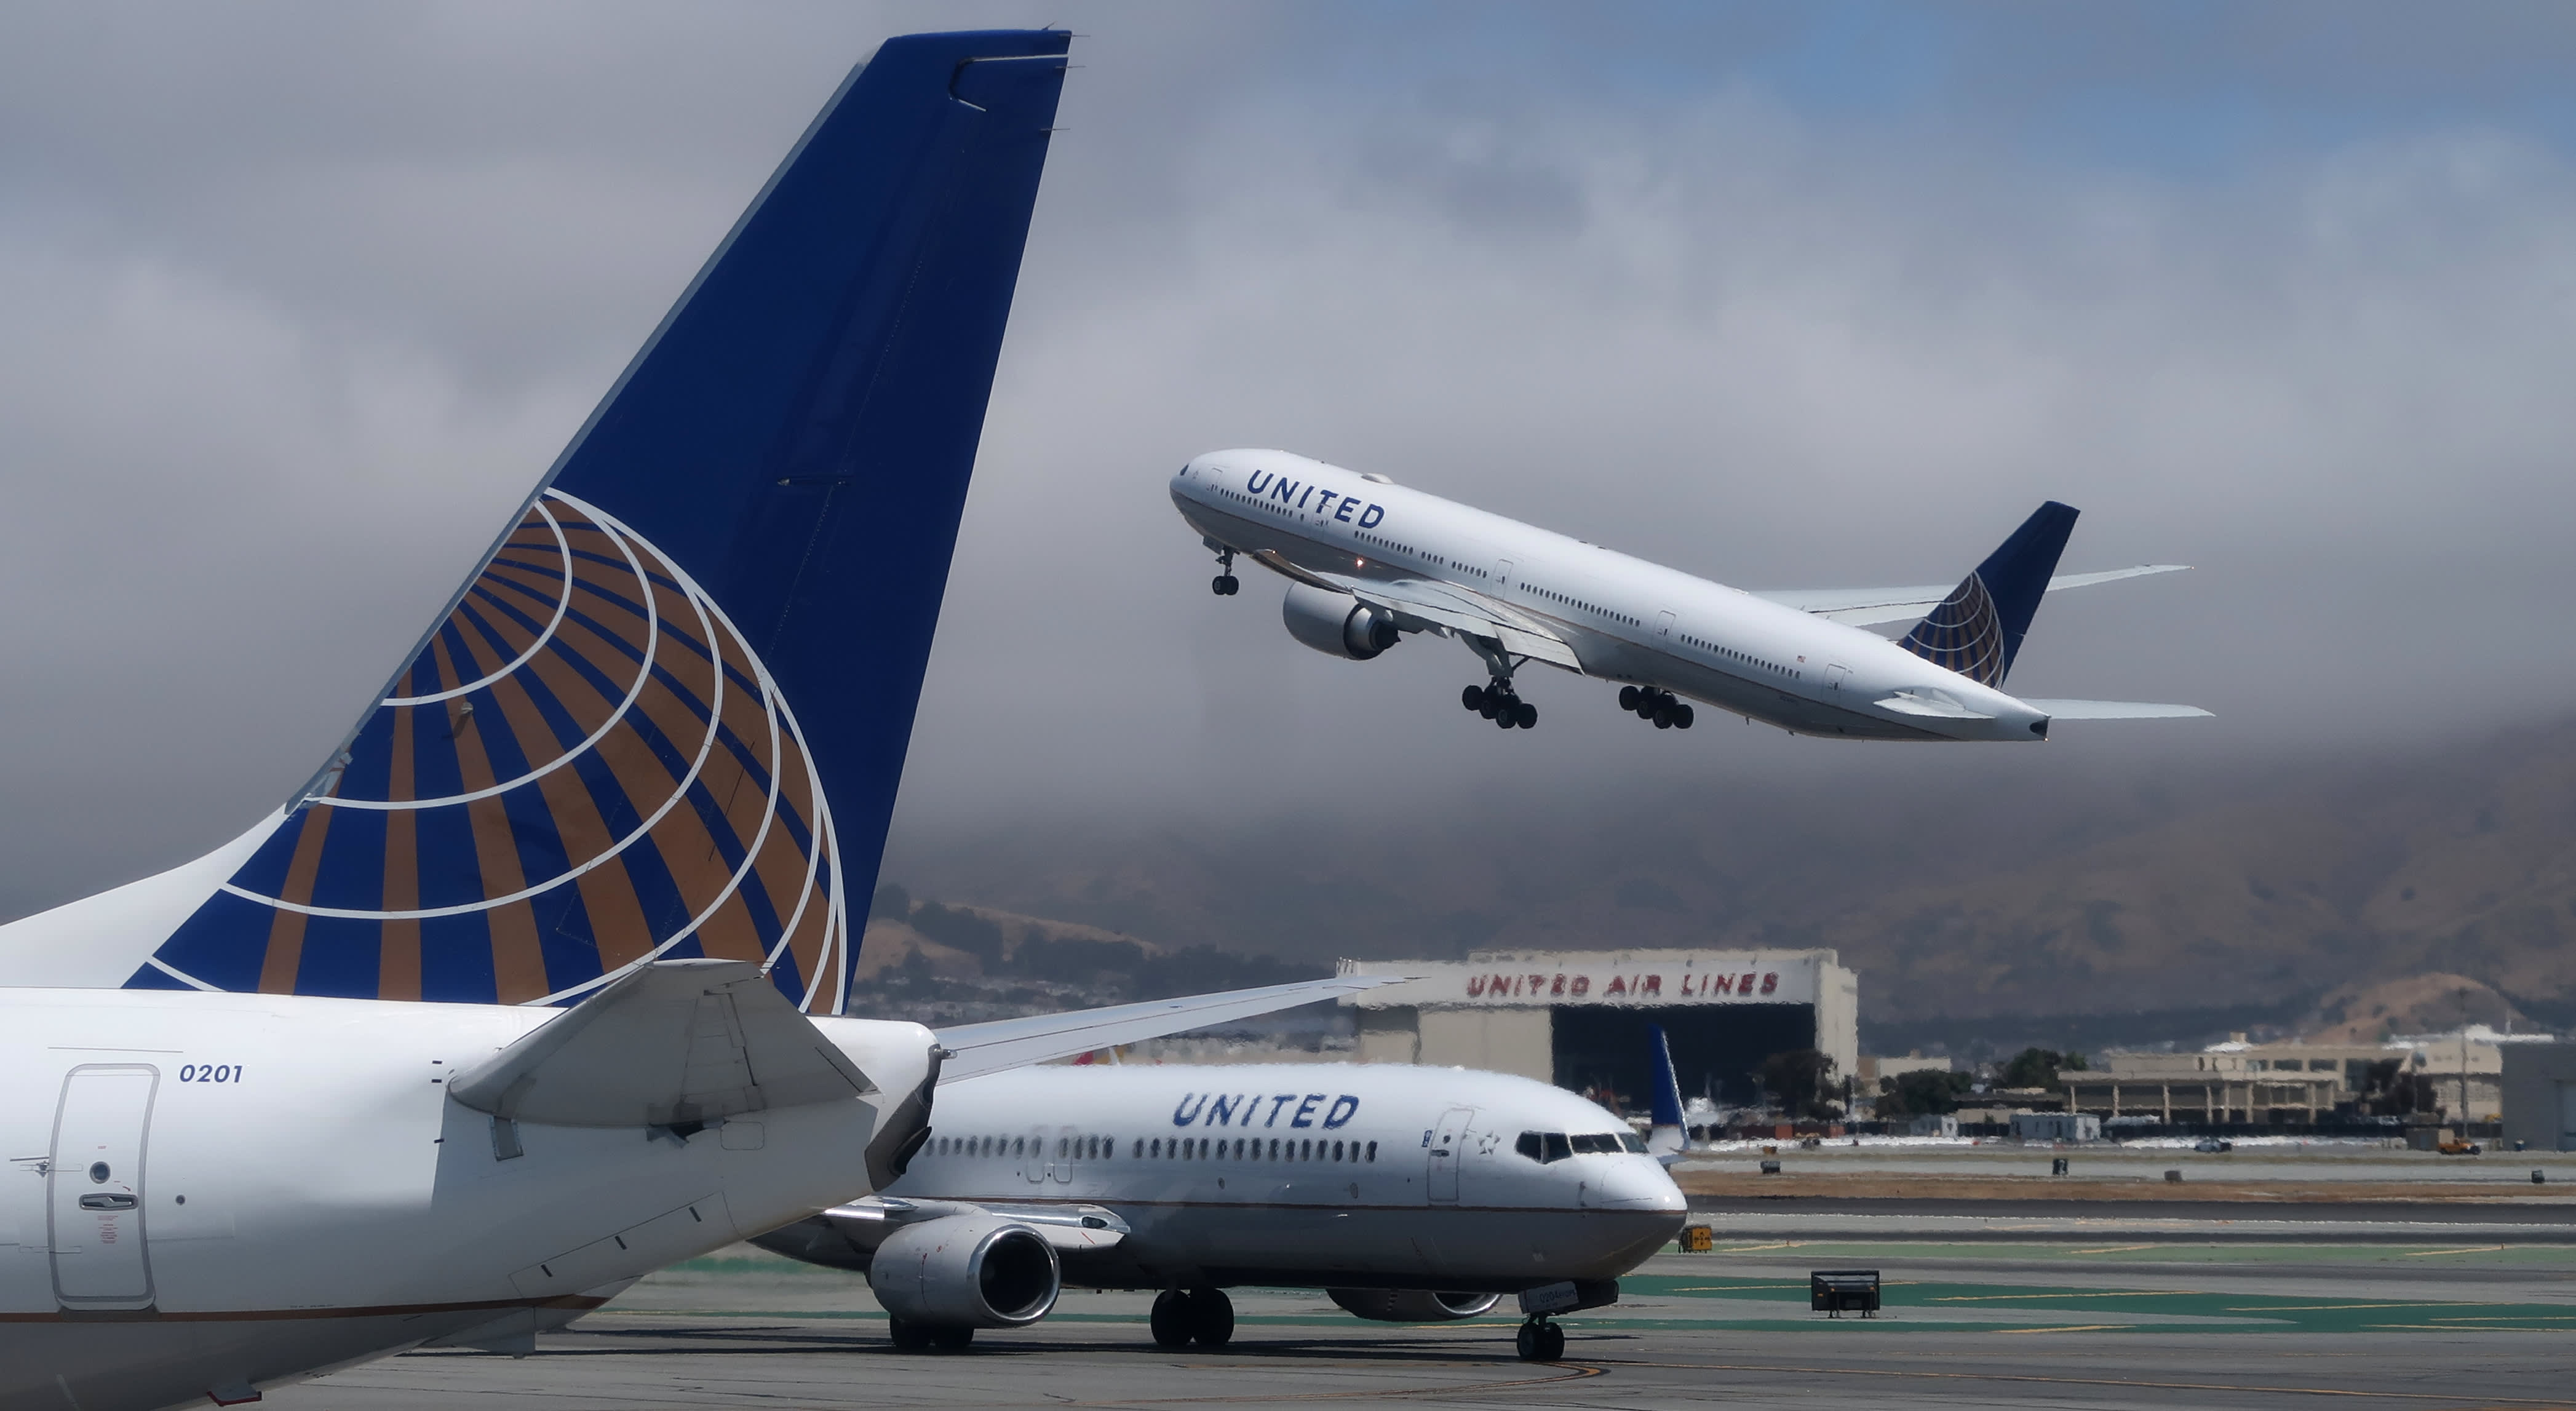 United's unvaccinated staff drops from 593 to 320 after company said they would be fired - CNBC